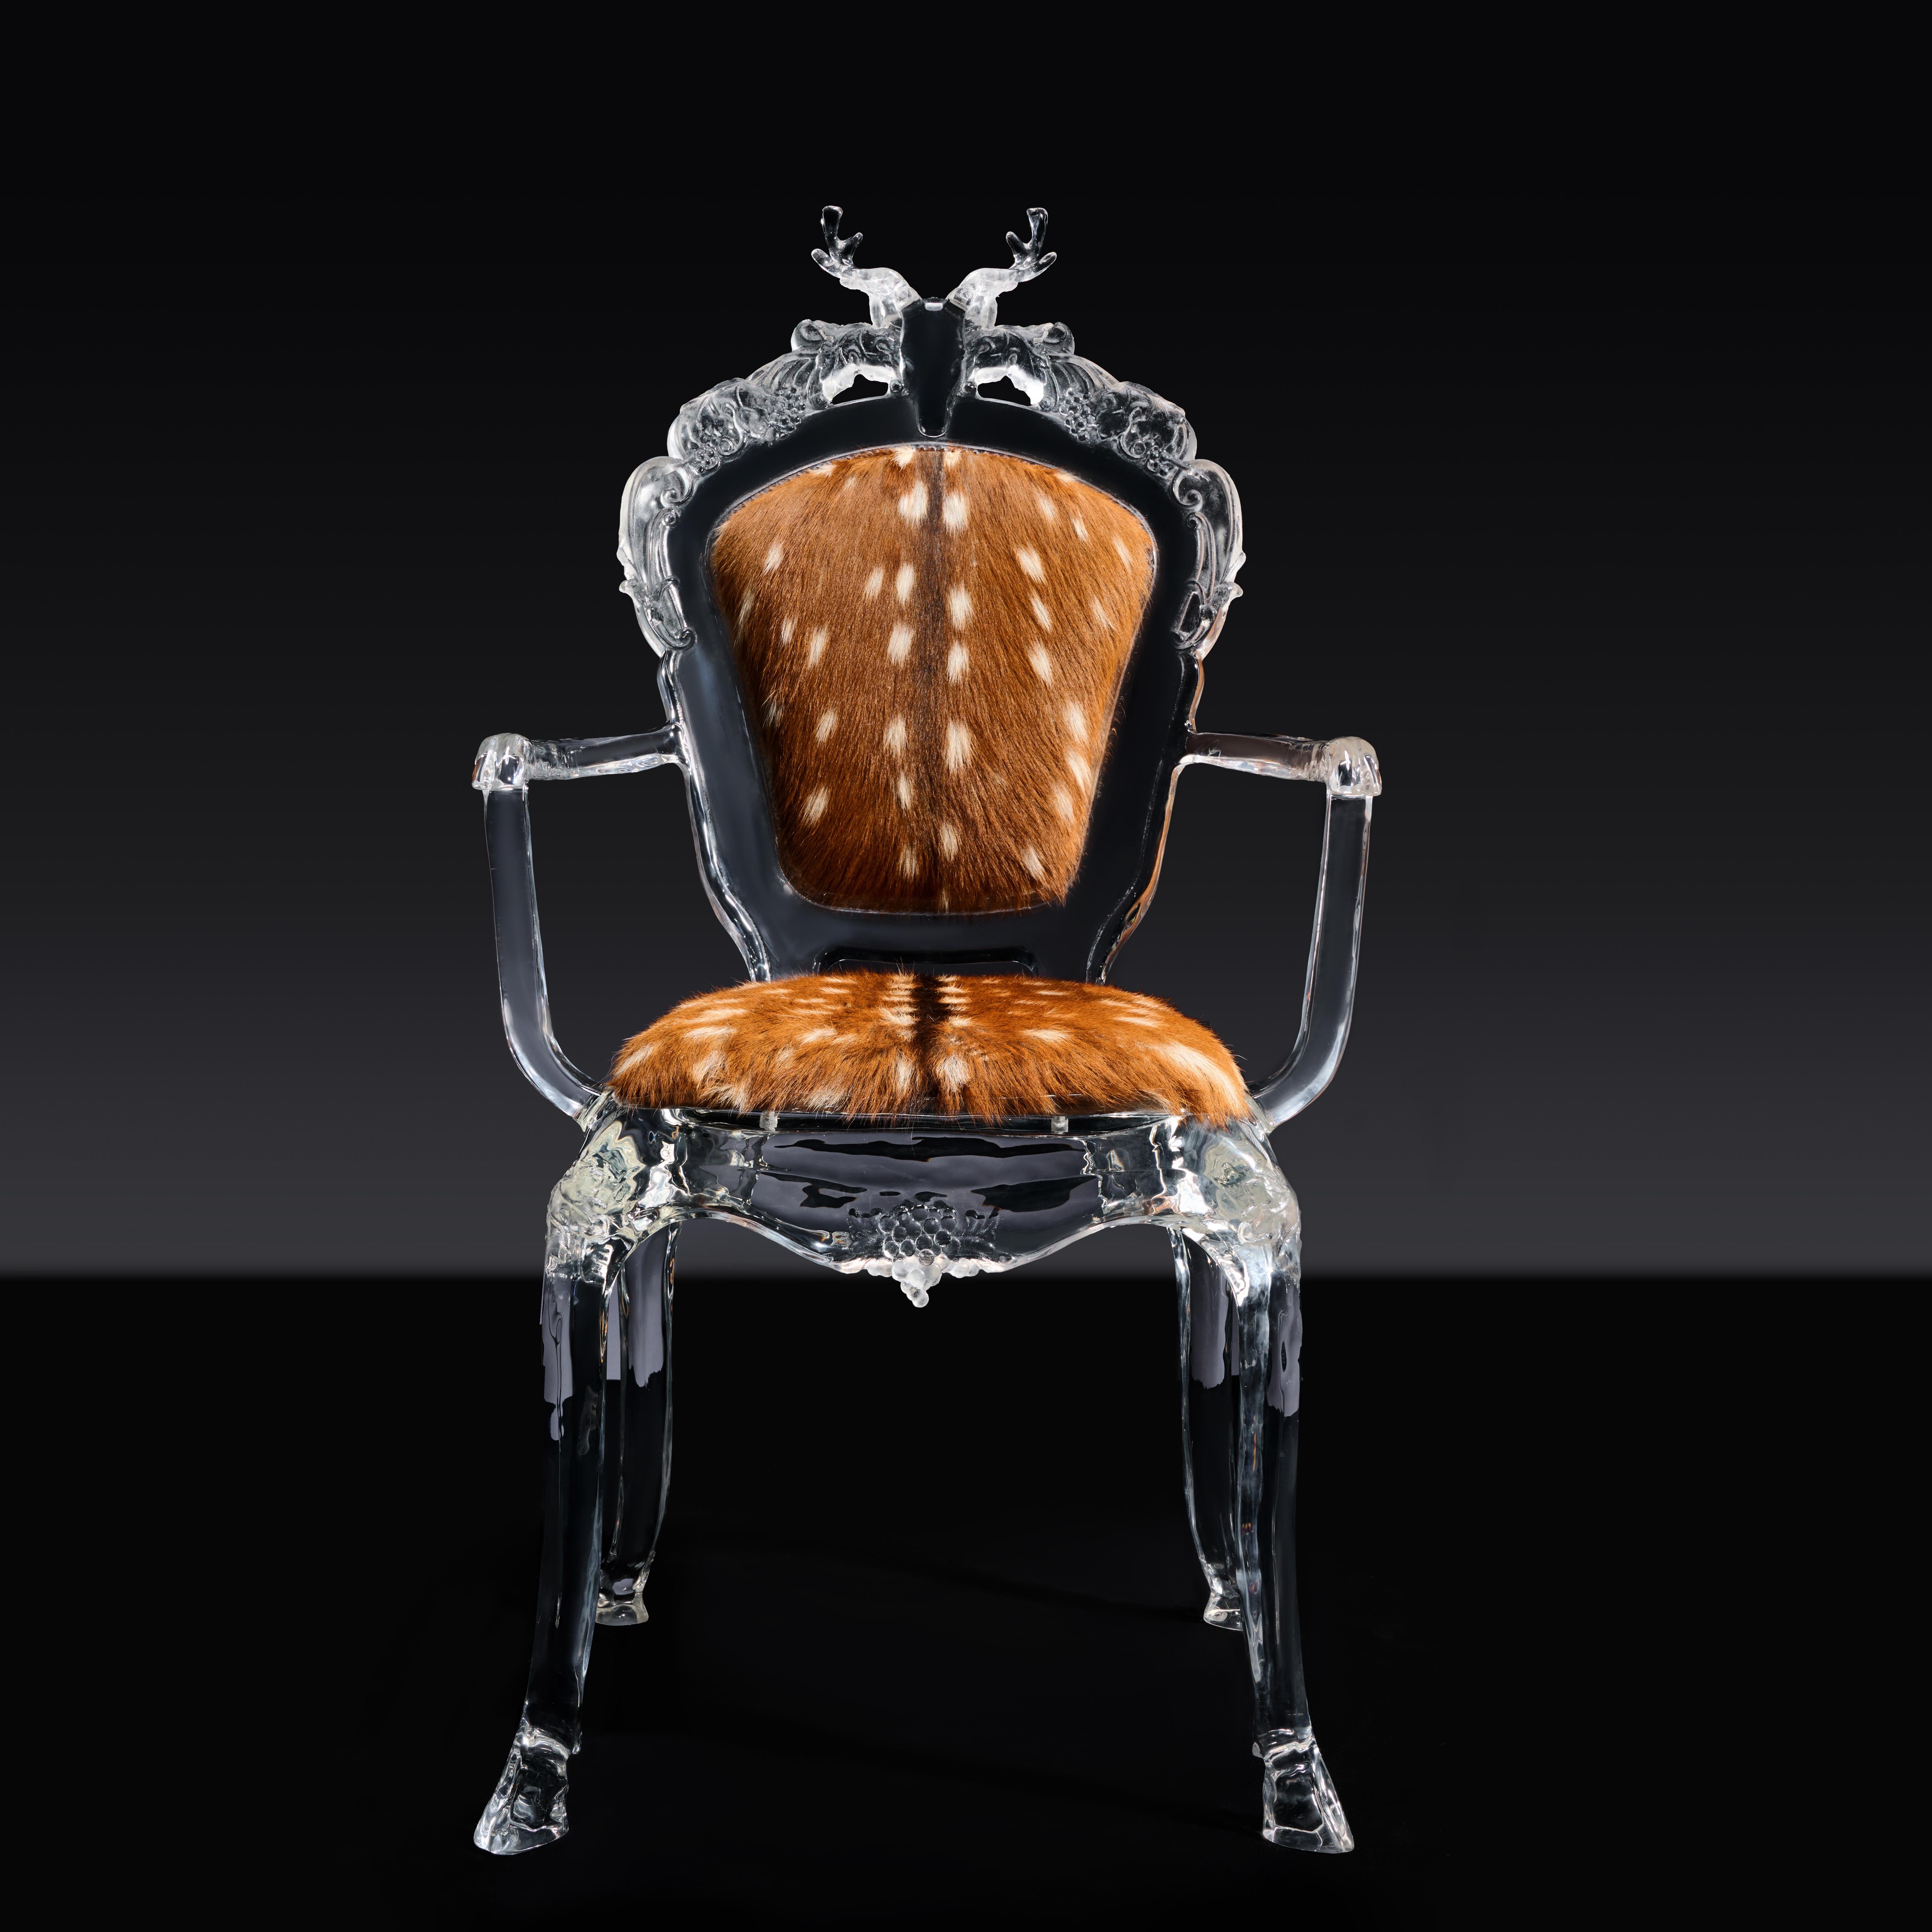 The chair is based on a Rococo style antique chair. This style of furniture flourished in the 30s of the 18th century, emphasizing beautiful art decoration and smooth curved shapes, and is one of the milestones in the history of furniture